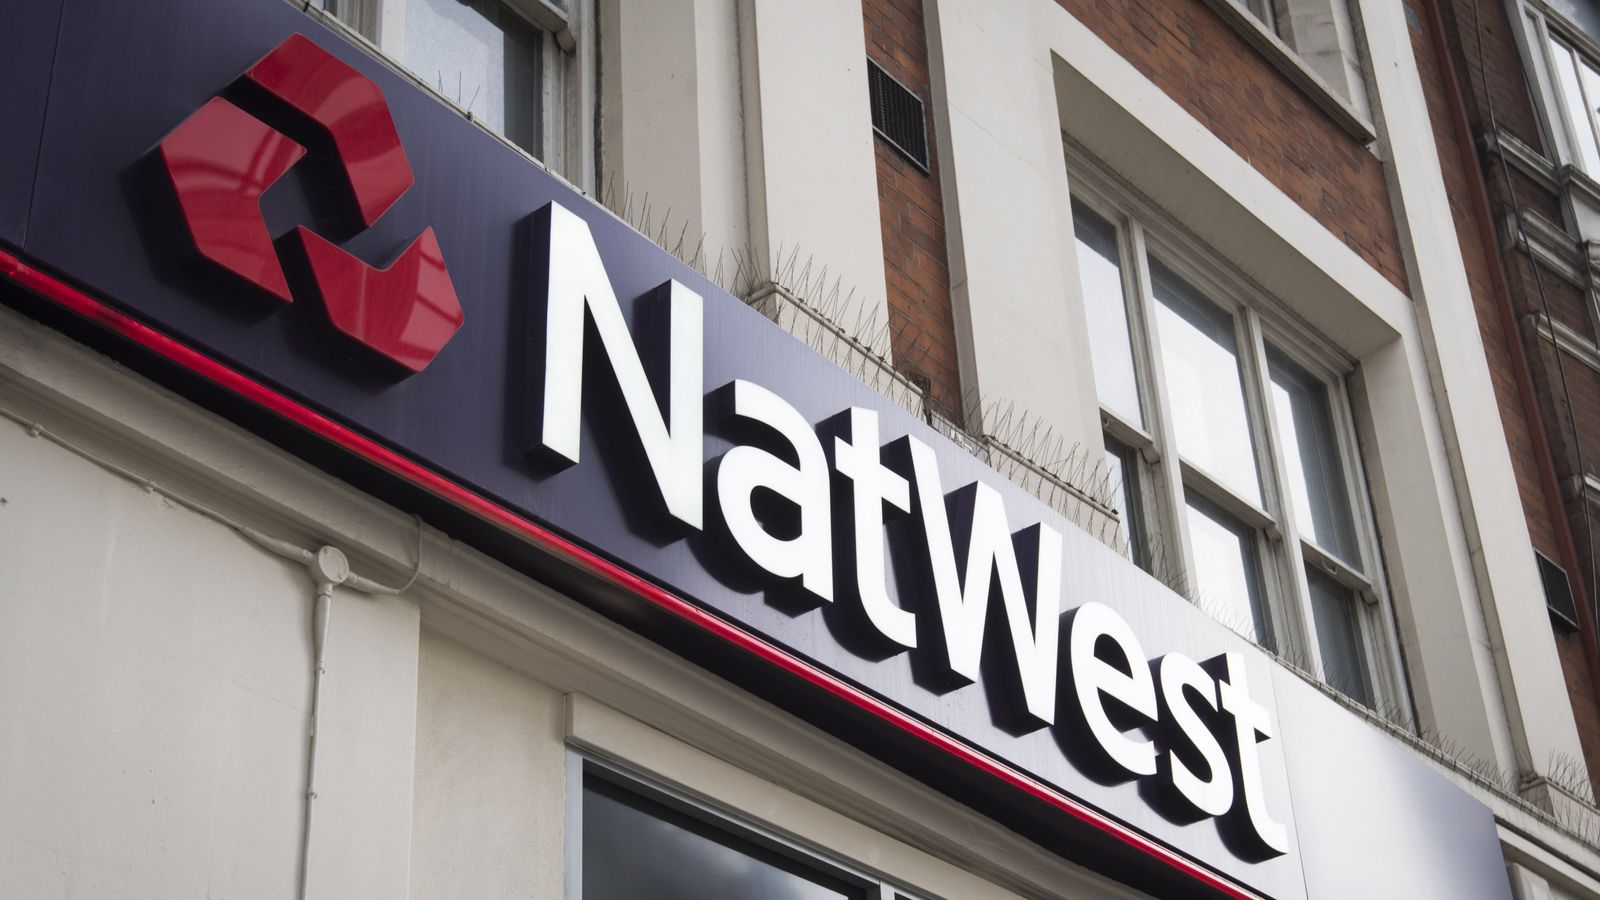 NatWest beats profit expectations with 50% hike on last year